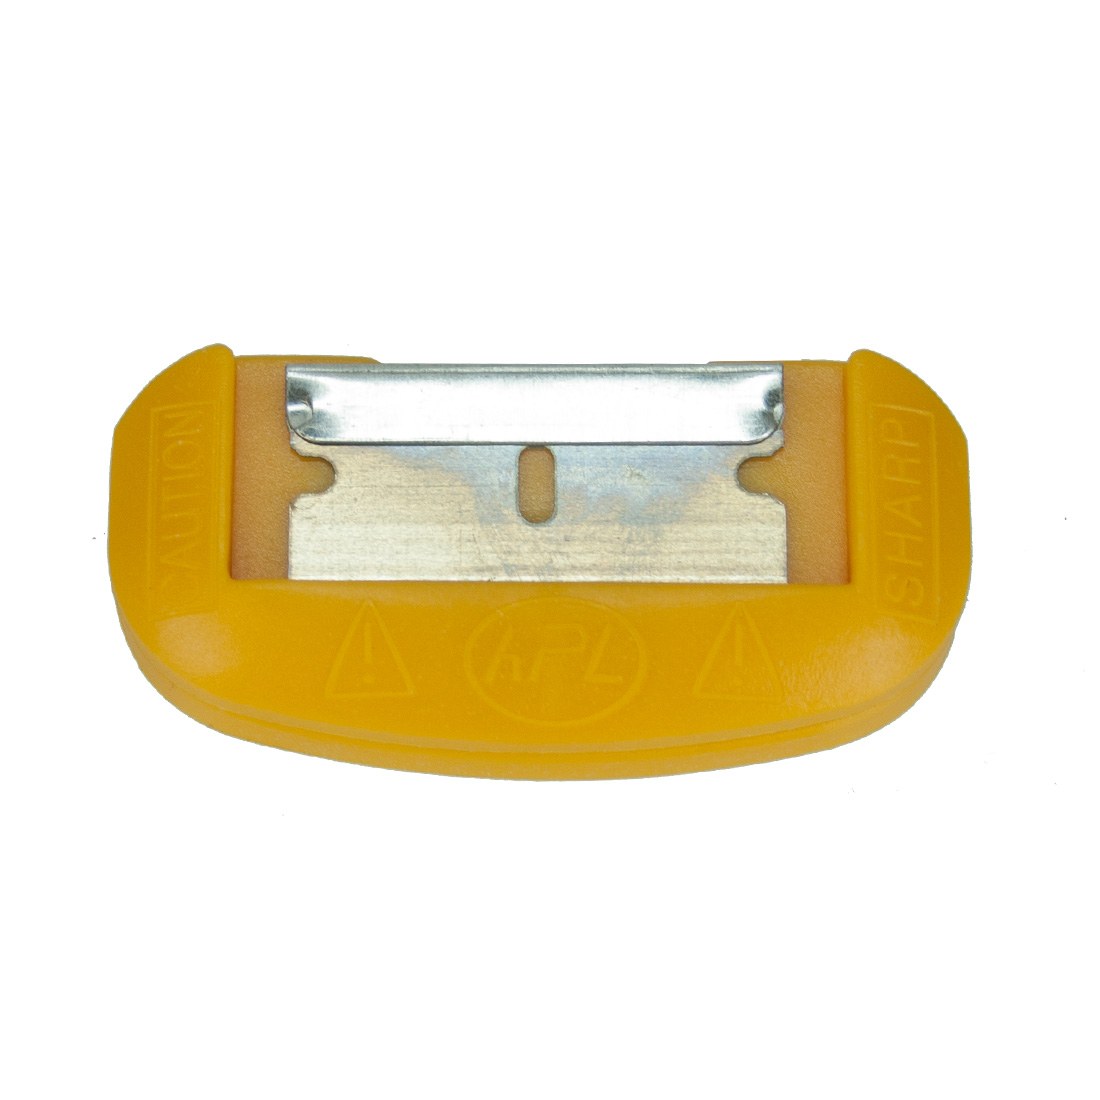 BladeLock Magnetic Scraper Blade Holder - Front WIth Blade View